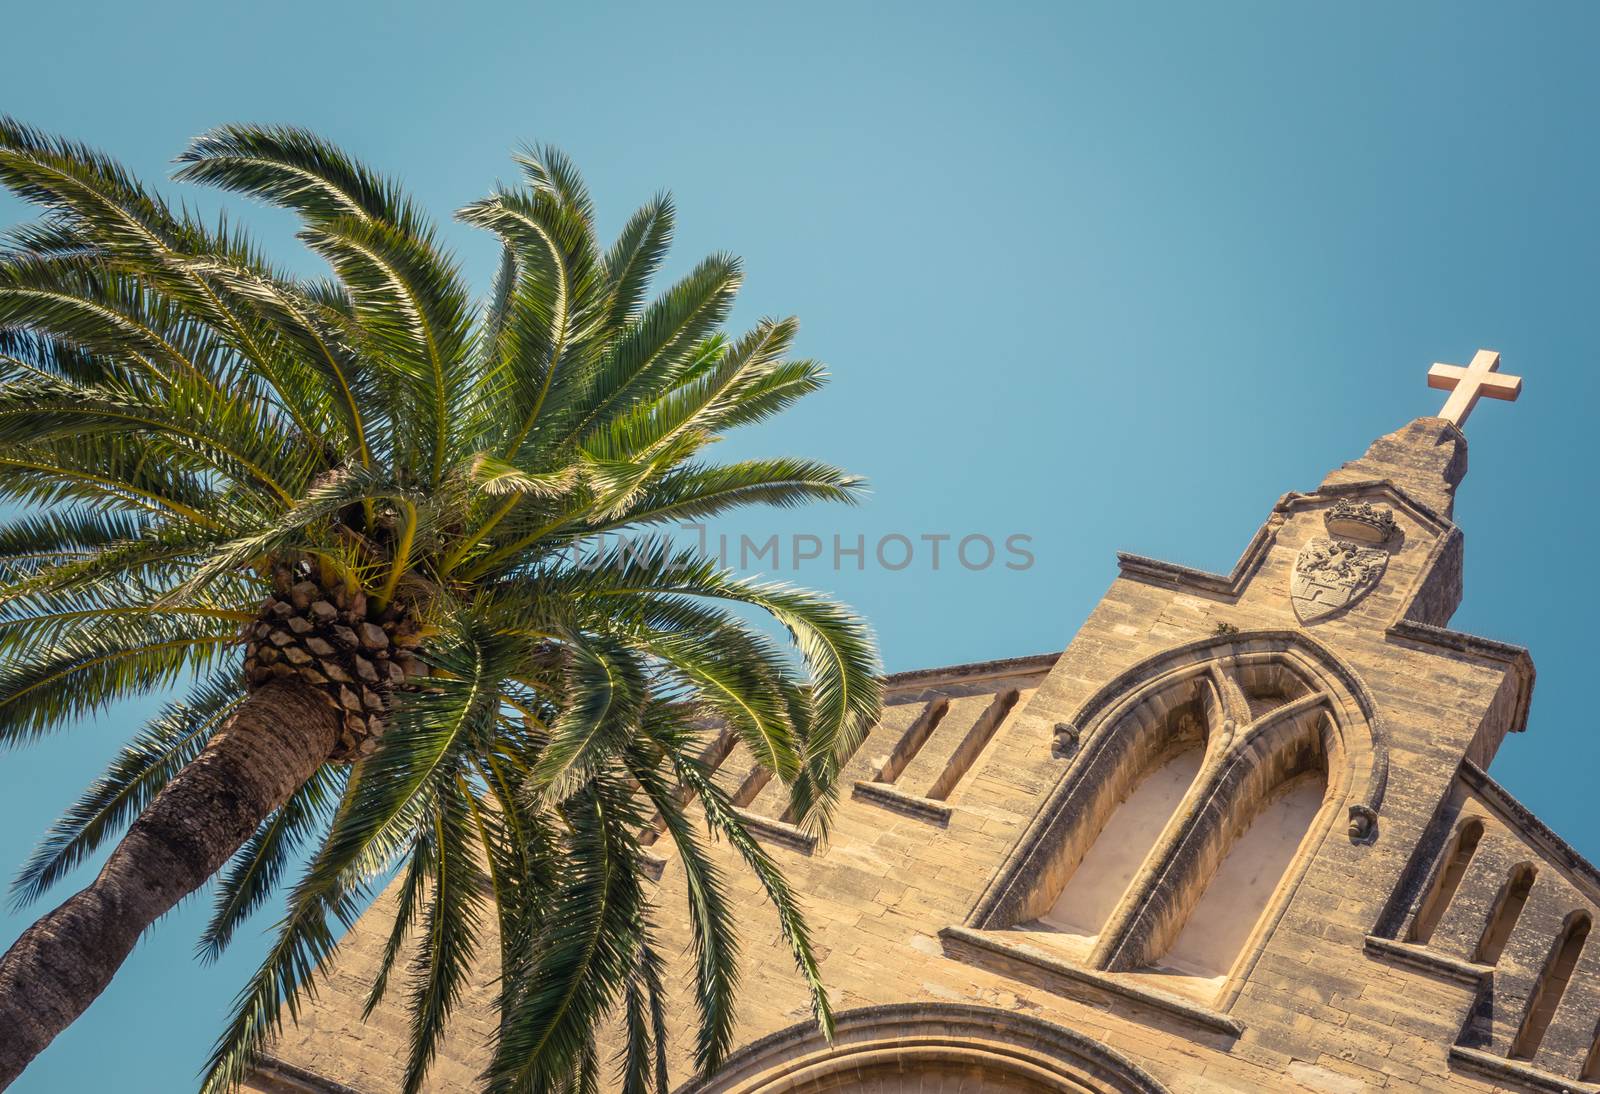 An Ancient Historic Church (Sant Jaume) And A Palm Tree In Mallorca, Spain, With Copy Space